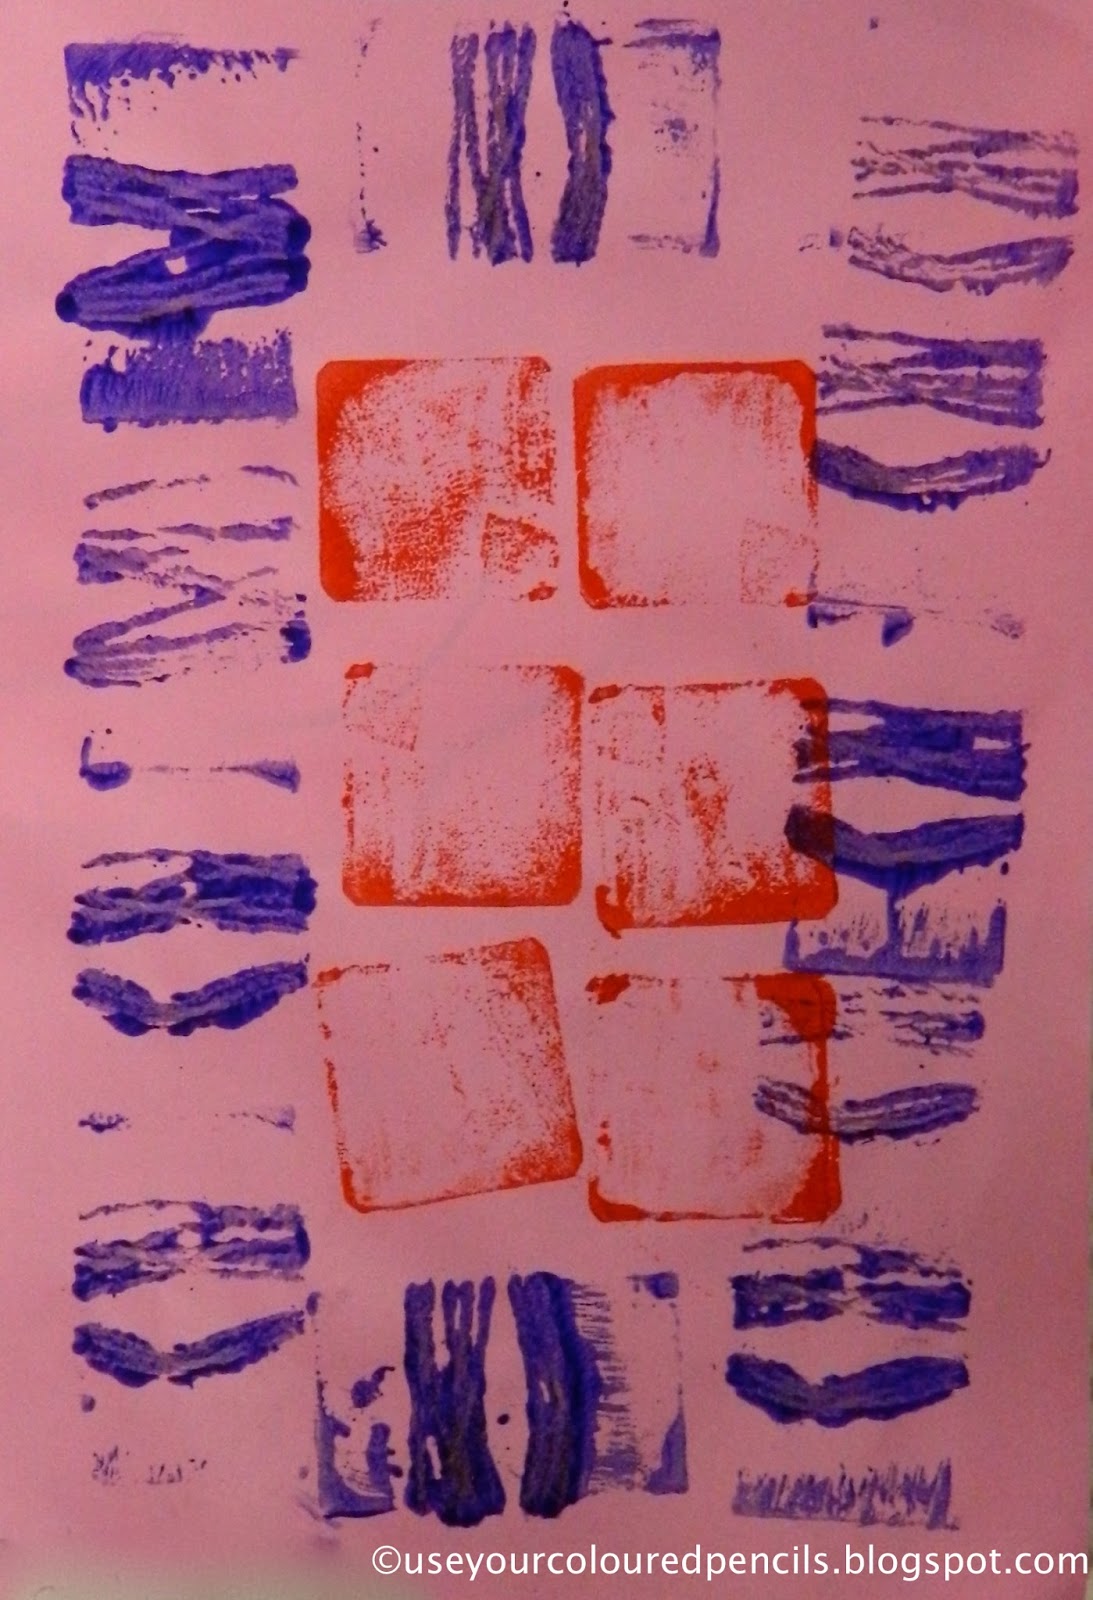 Use Your Coloured Pencils: Simple Wood Block Printing